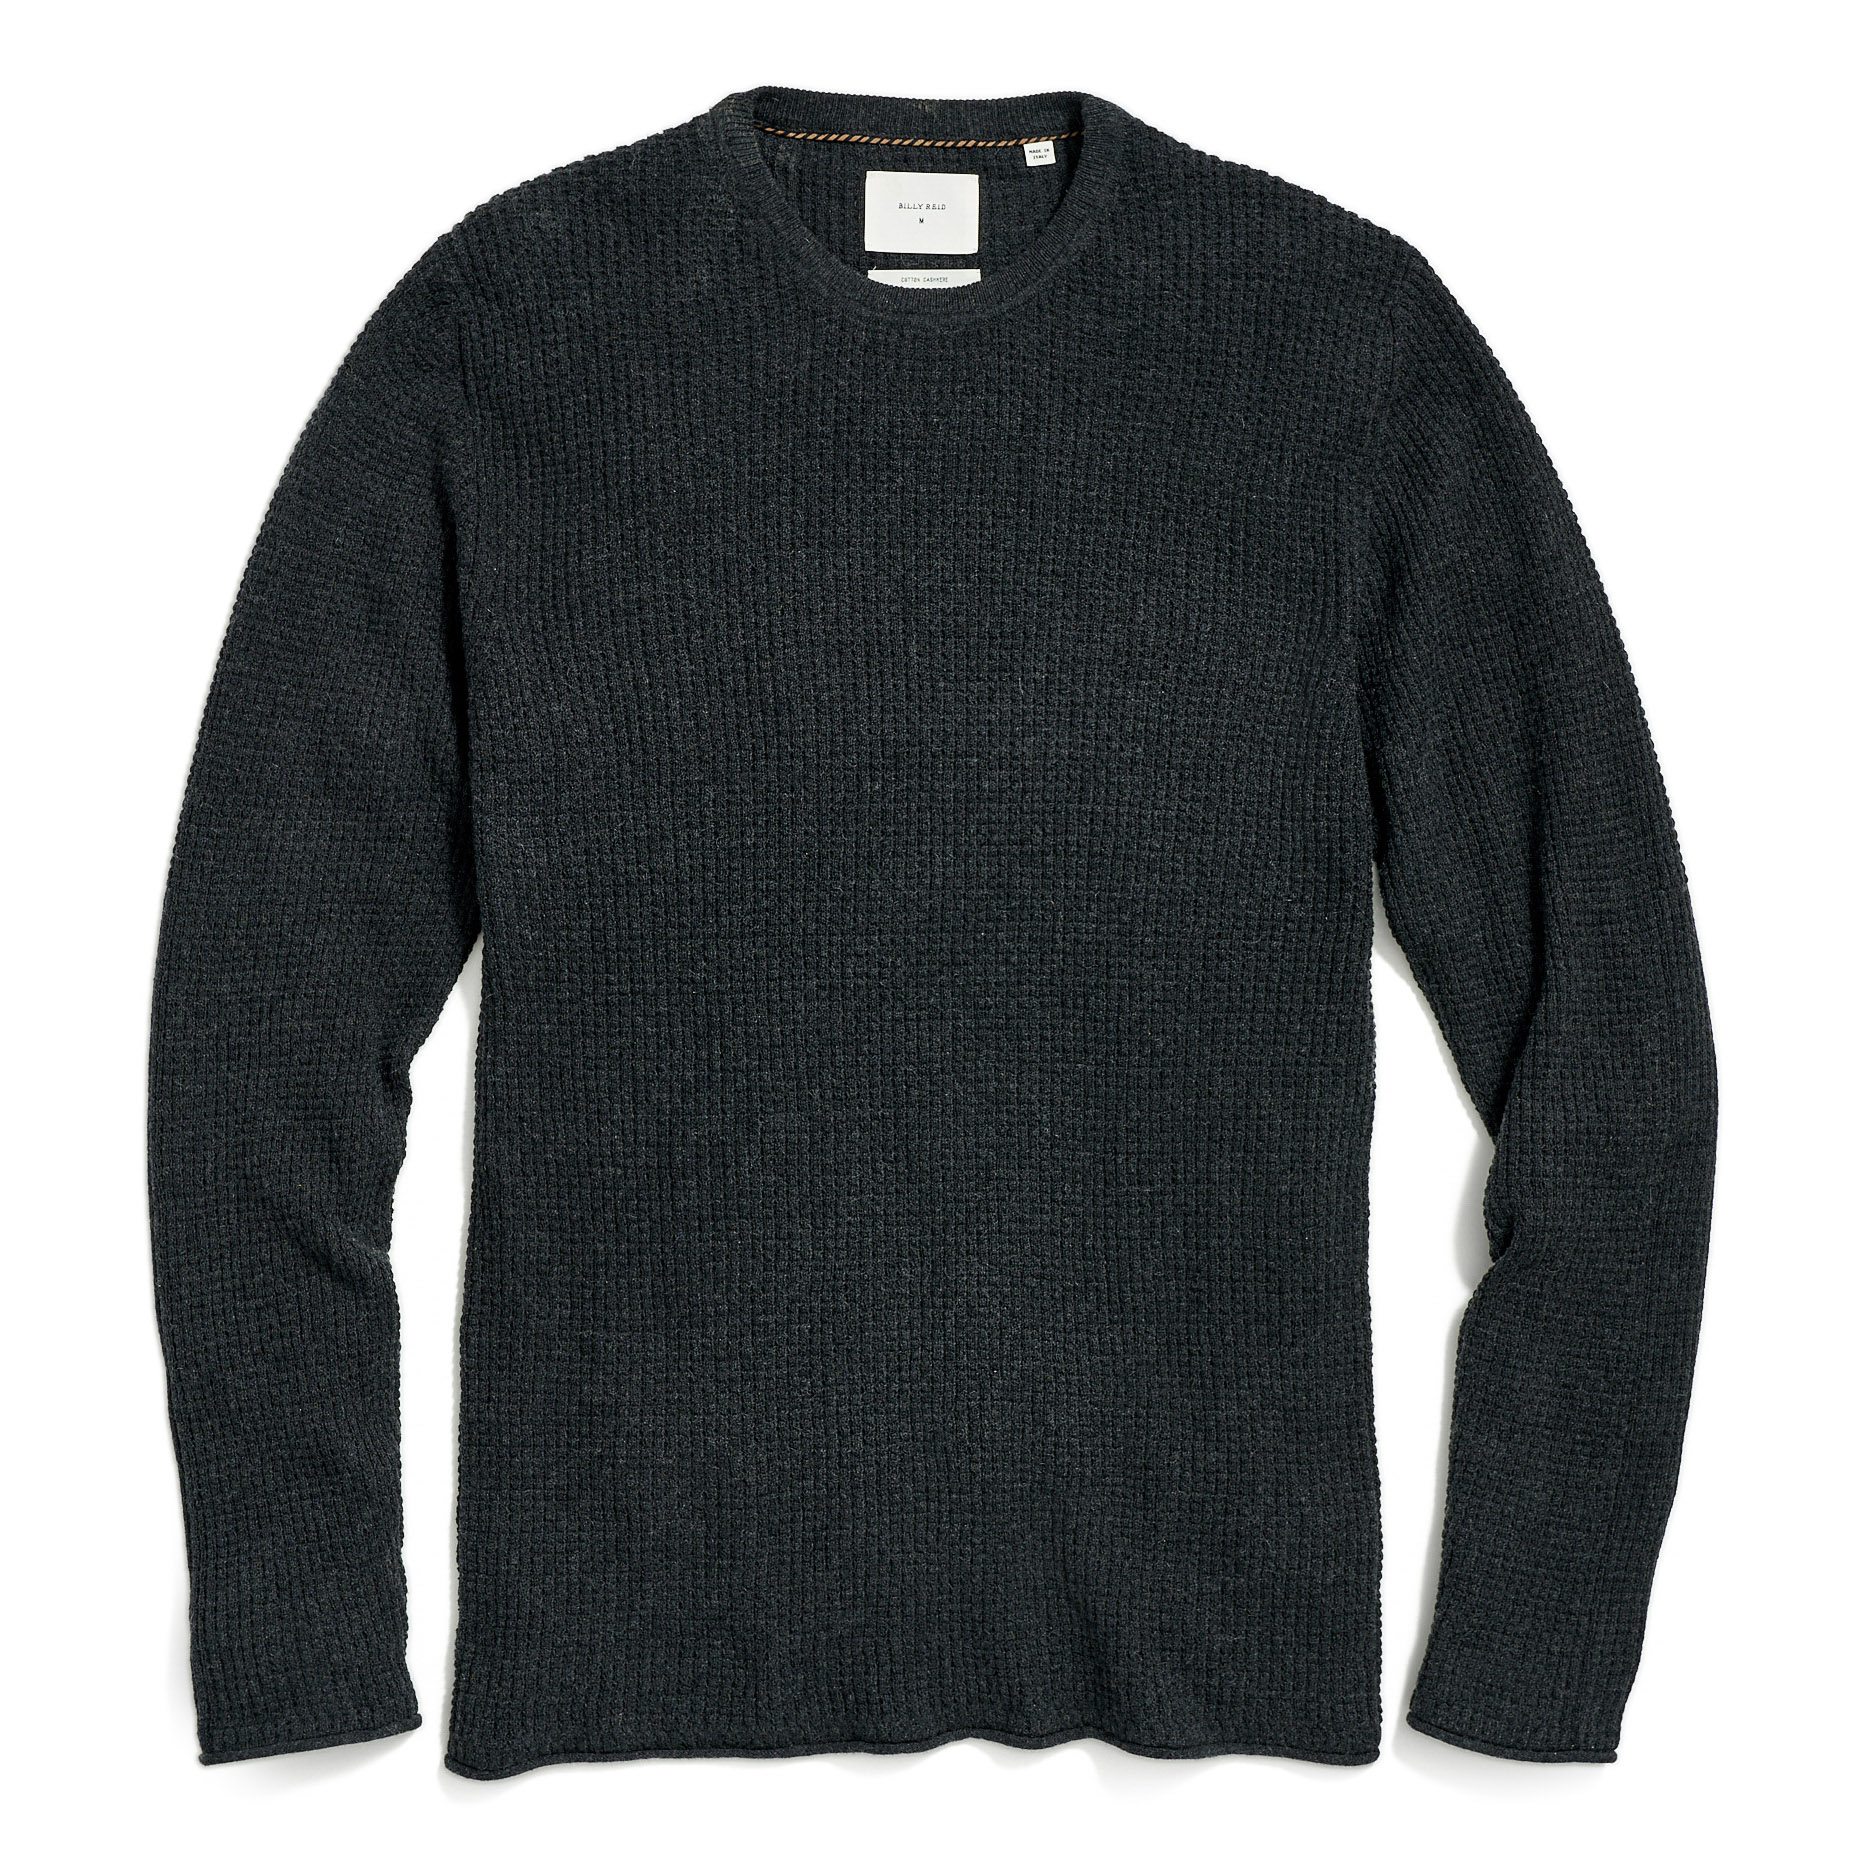 Billy Reid Waffle Cotton Cashmere Crewneck Sweater - Charcoal